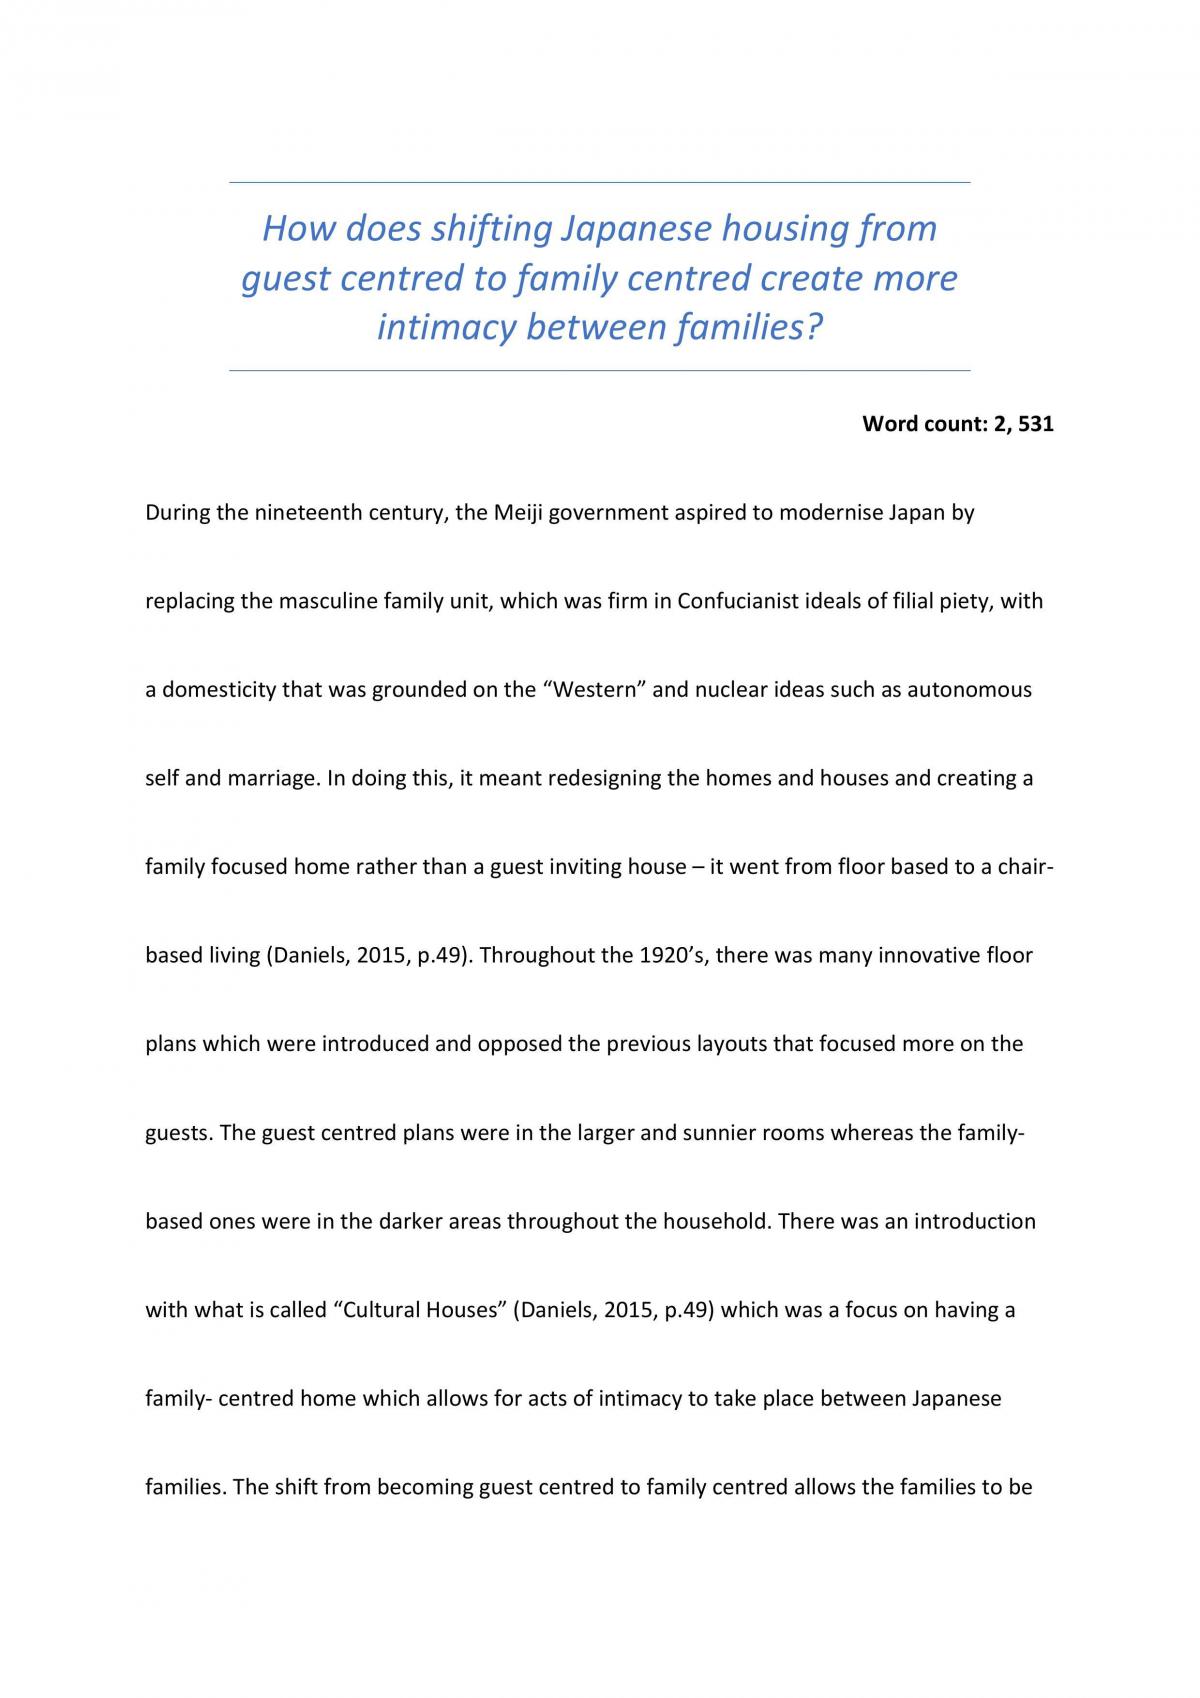 How does shifting Japanese housing from guest centred to family centred create more intimacy between families? - Page 1